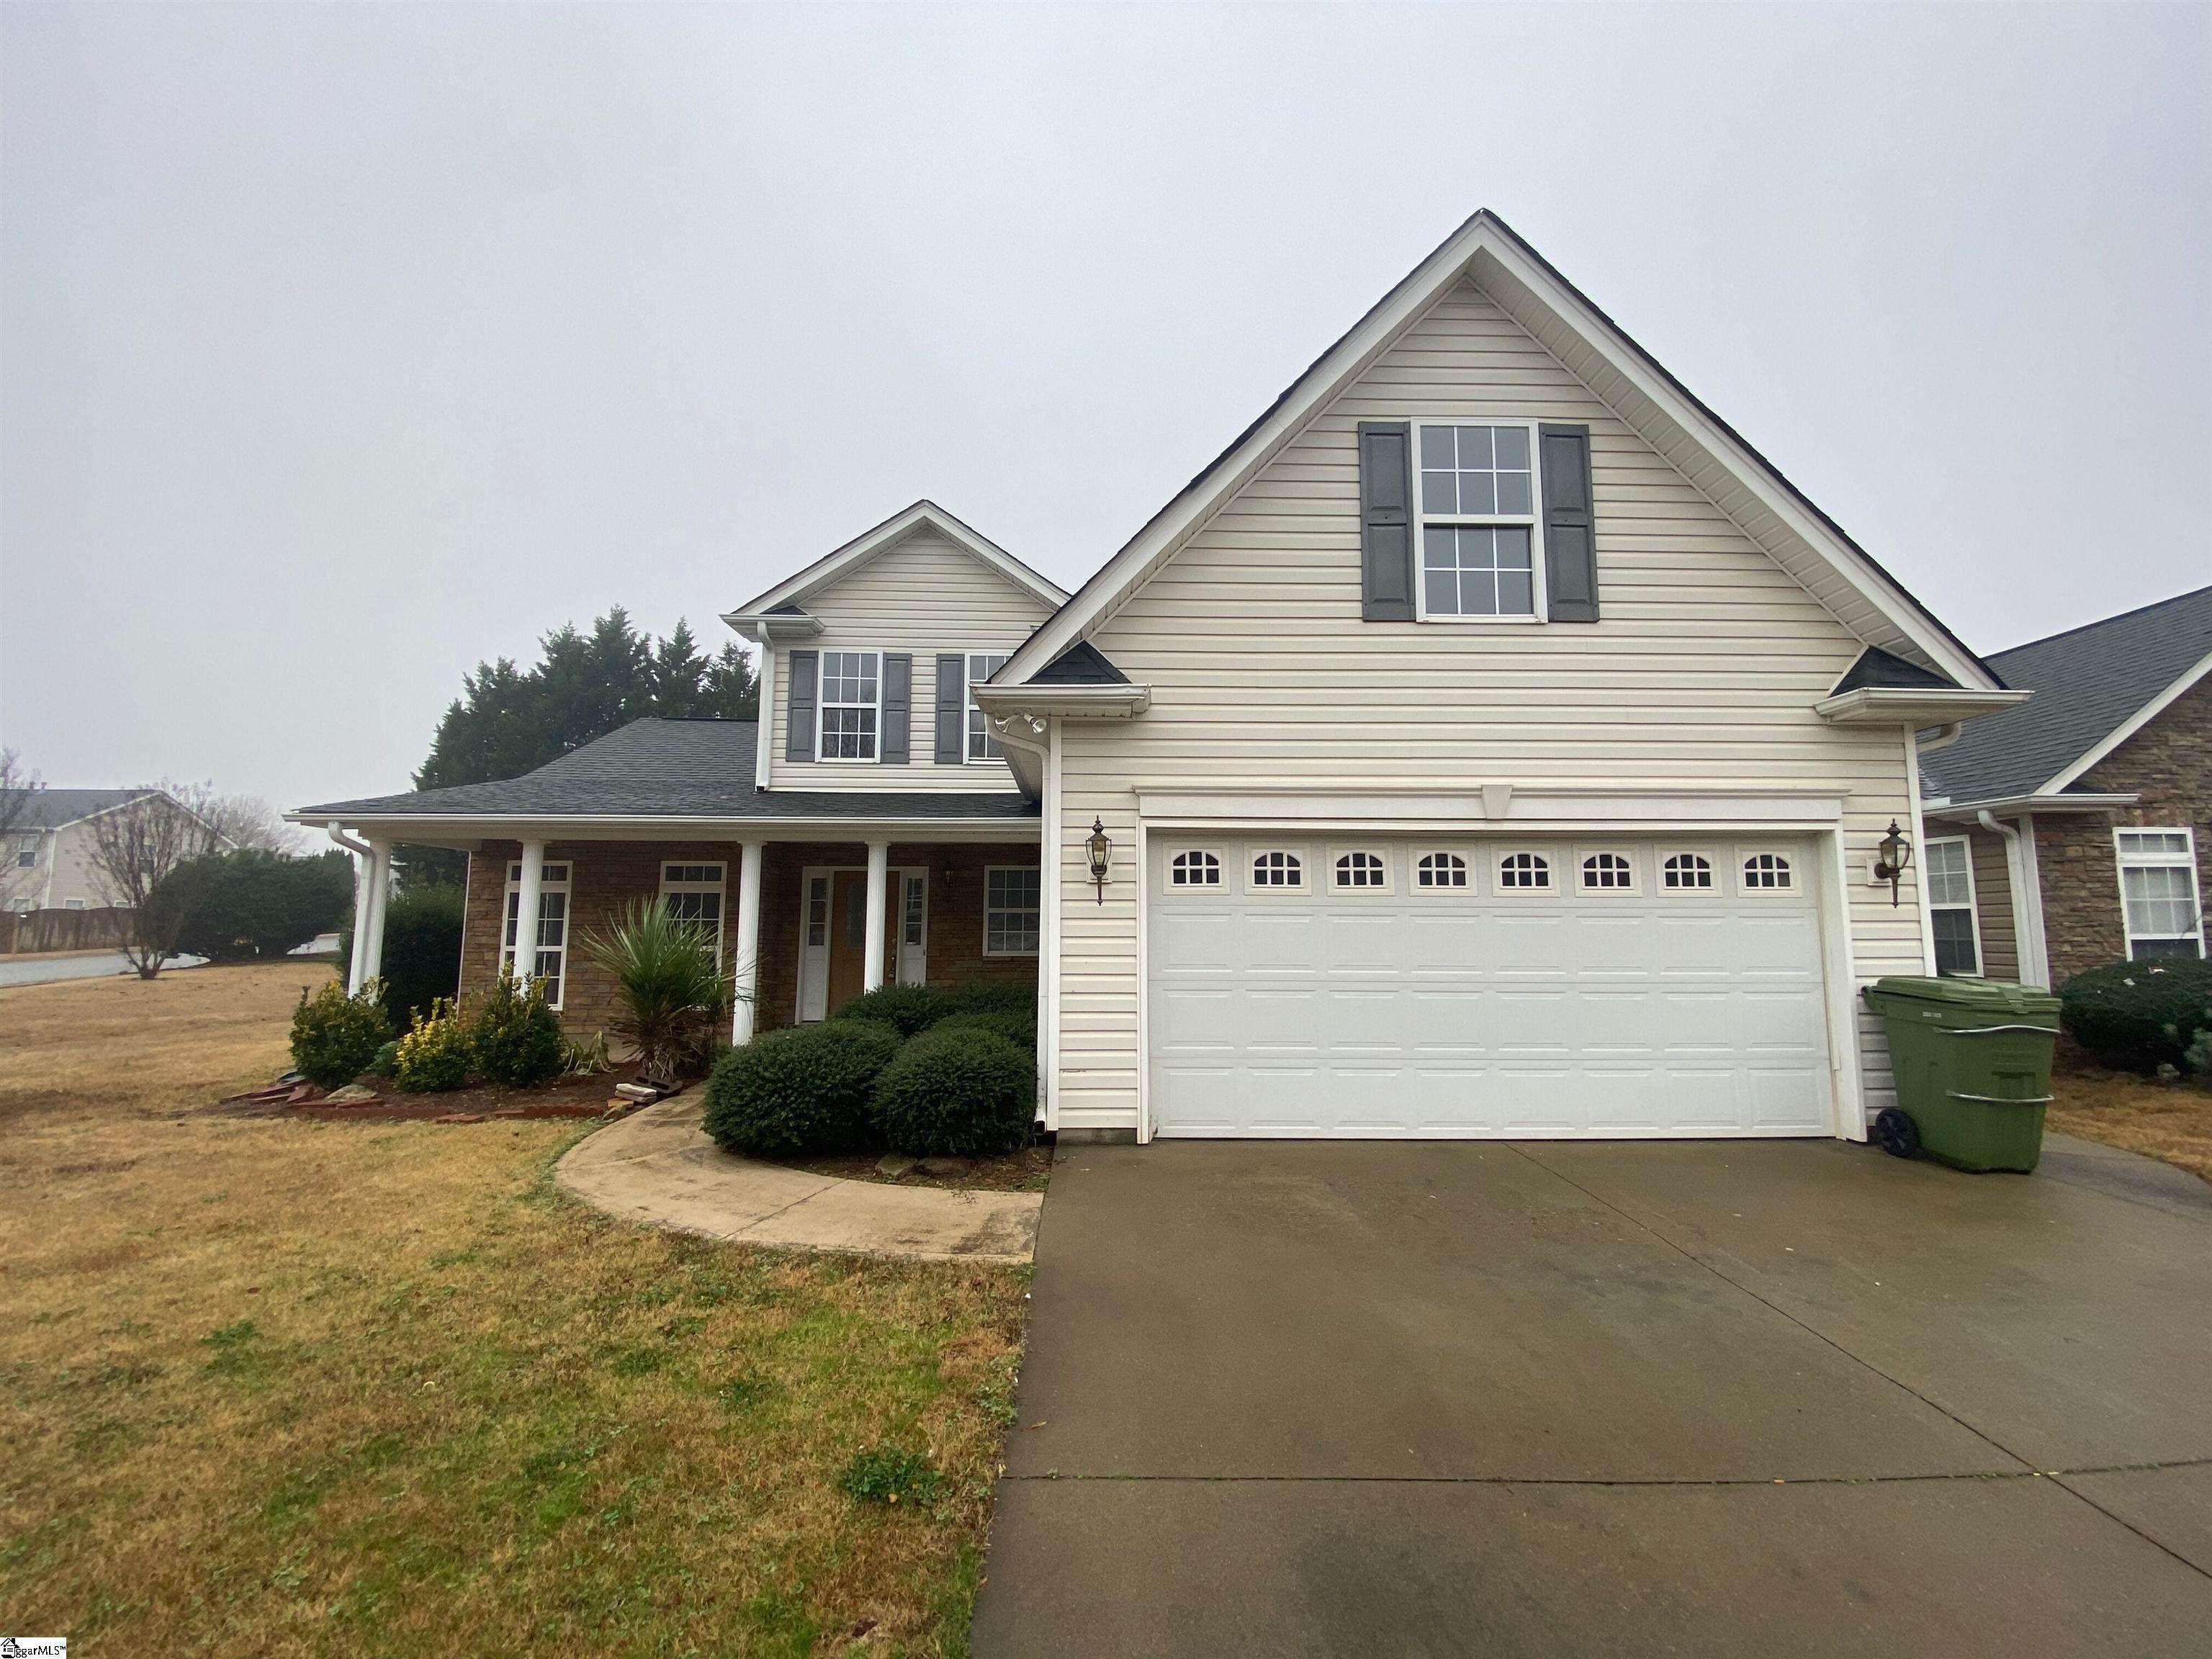 9. Single Family for Sale at Greenville, SC 29607